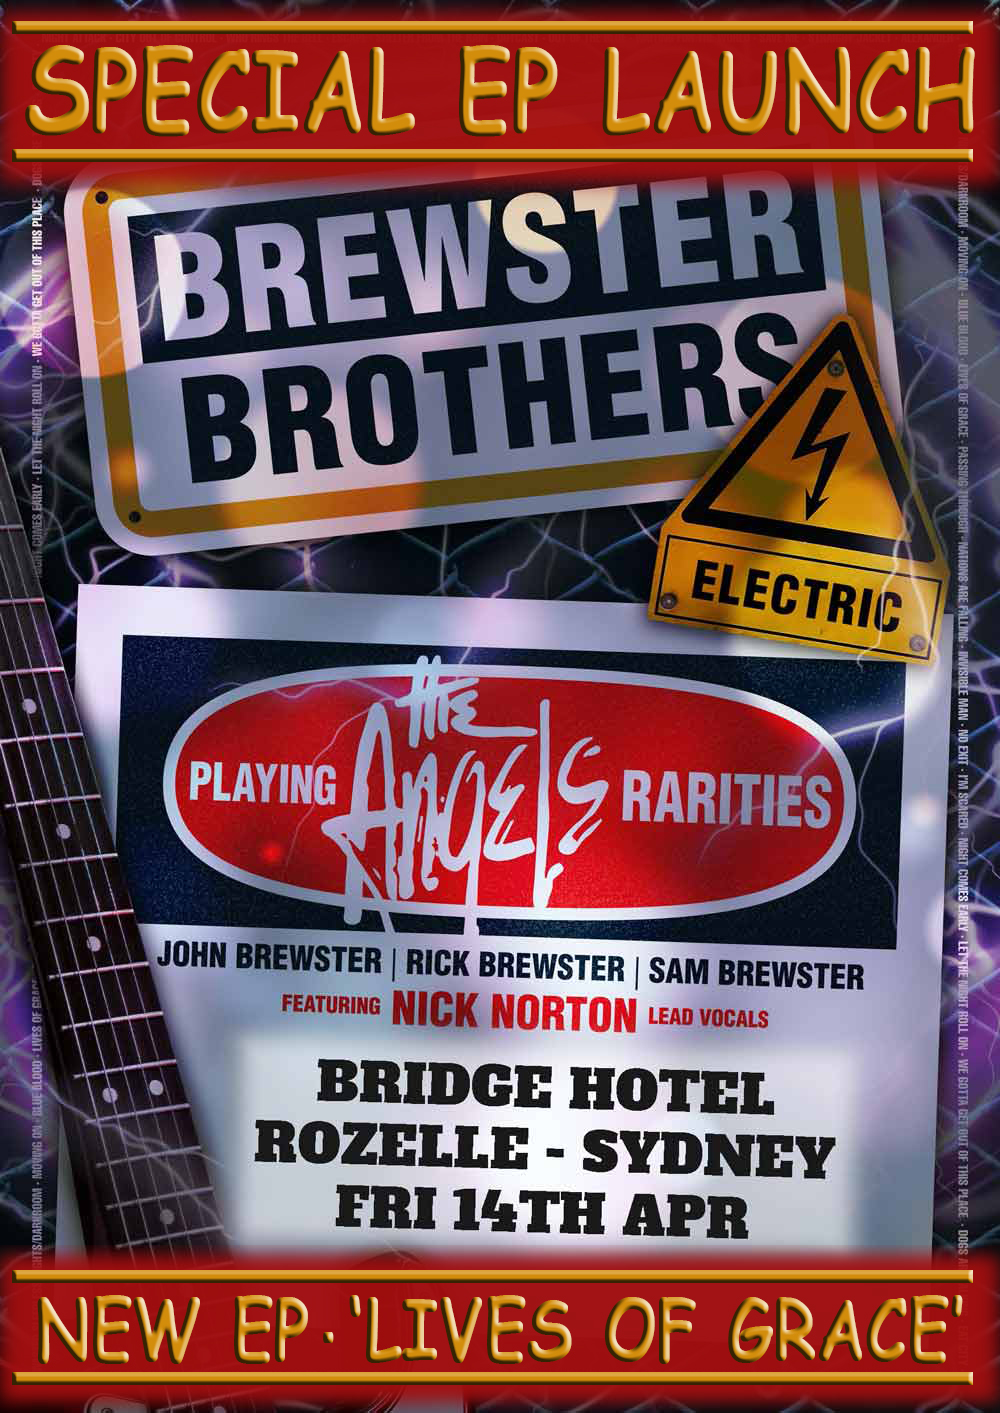 Brewster Brothers Electric - Playing Angels Rarities